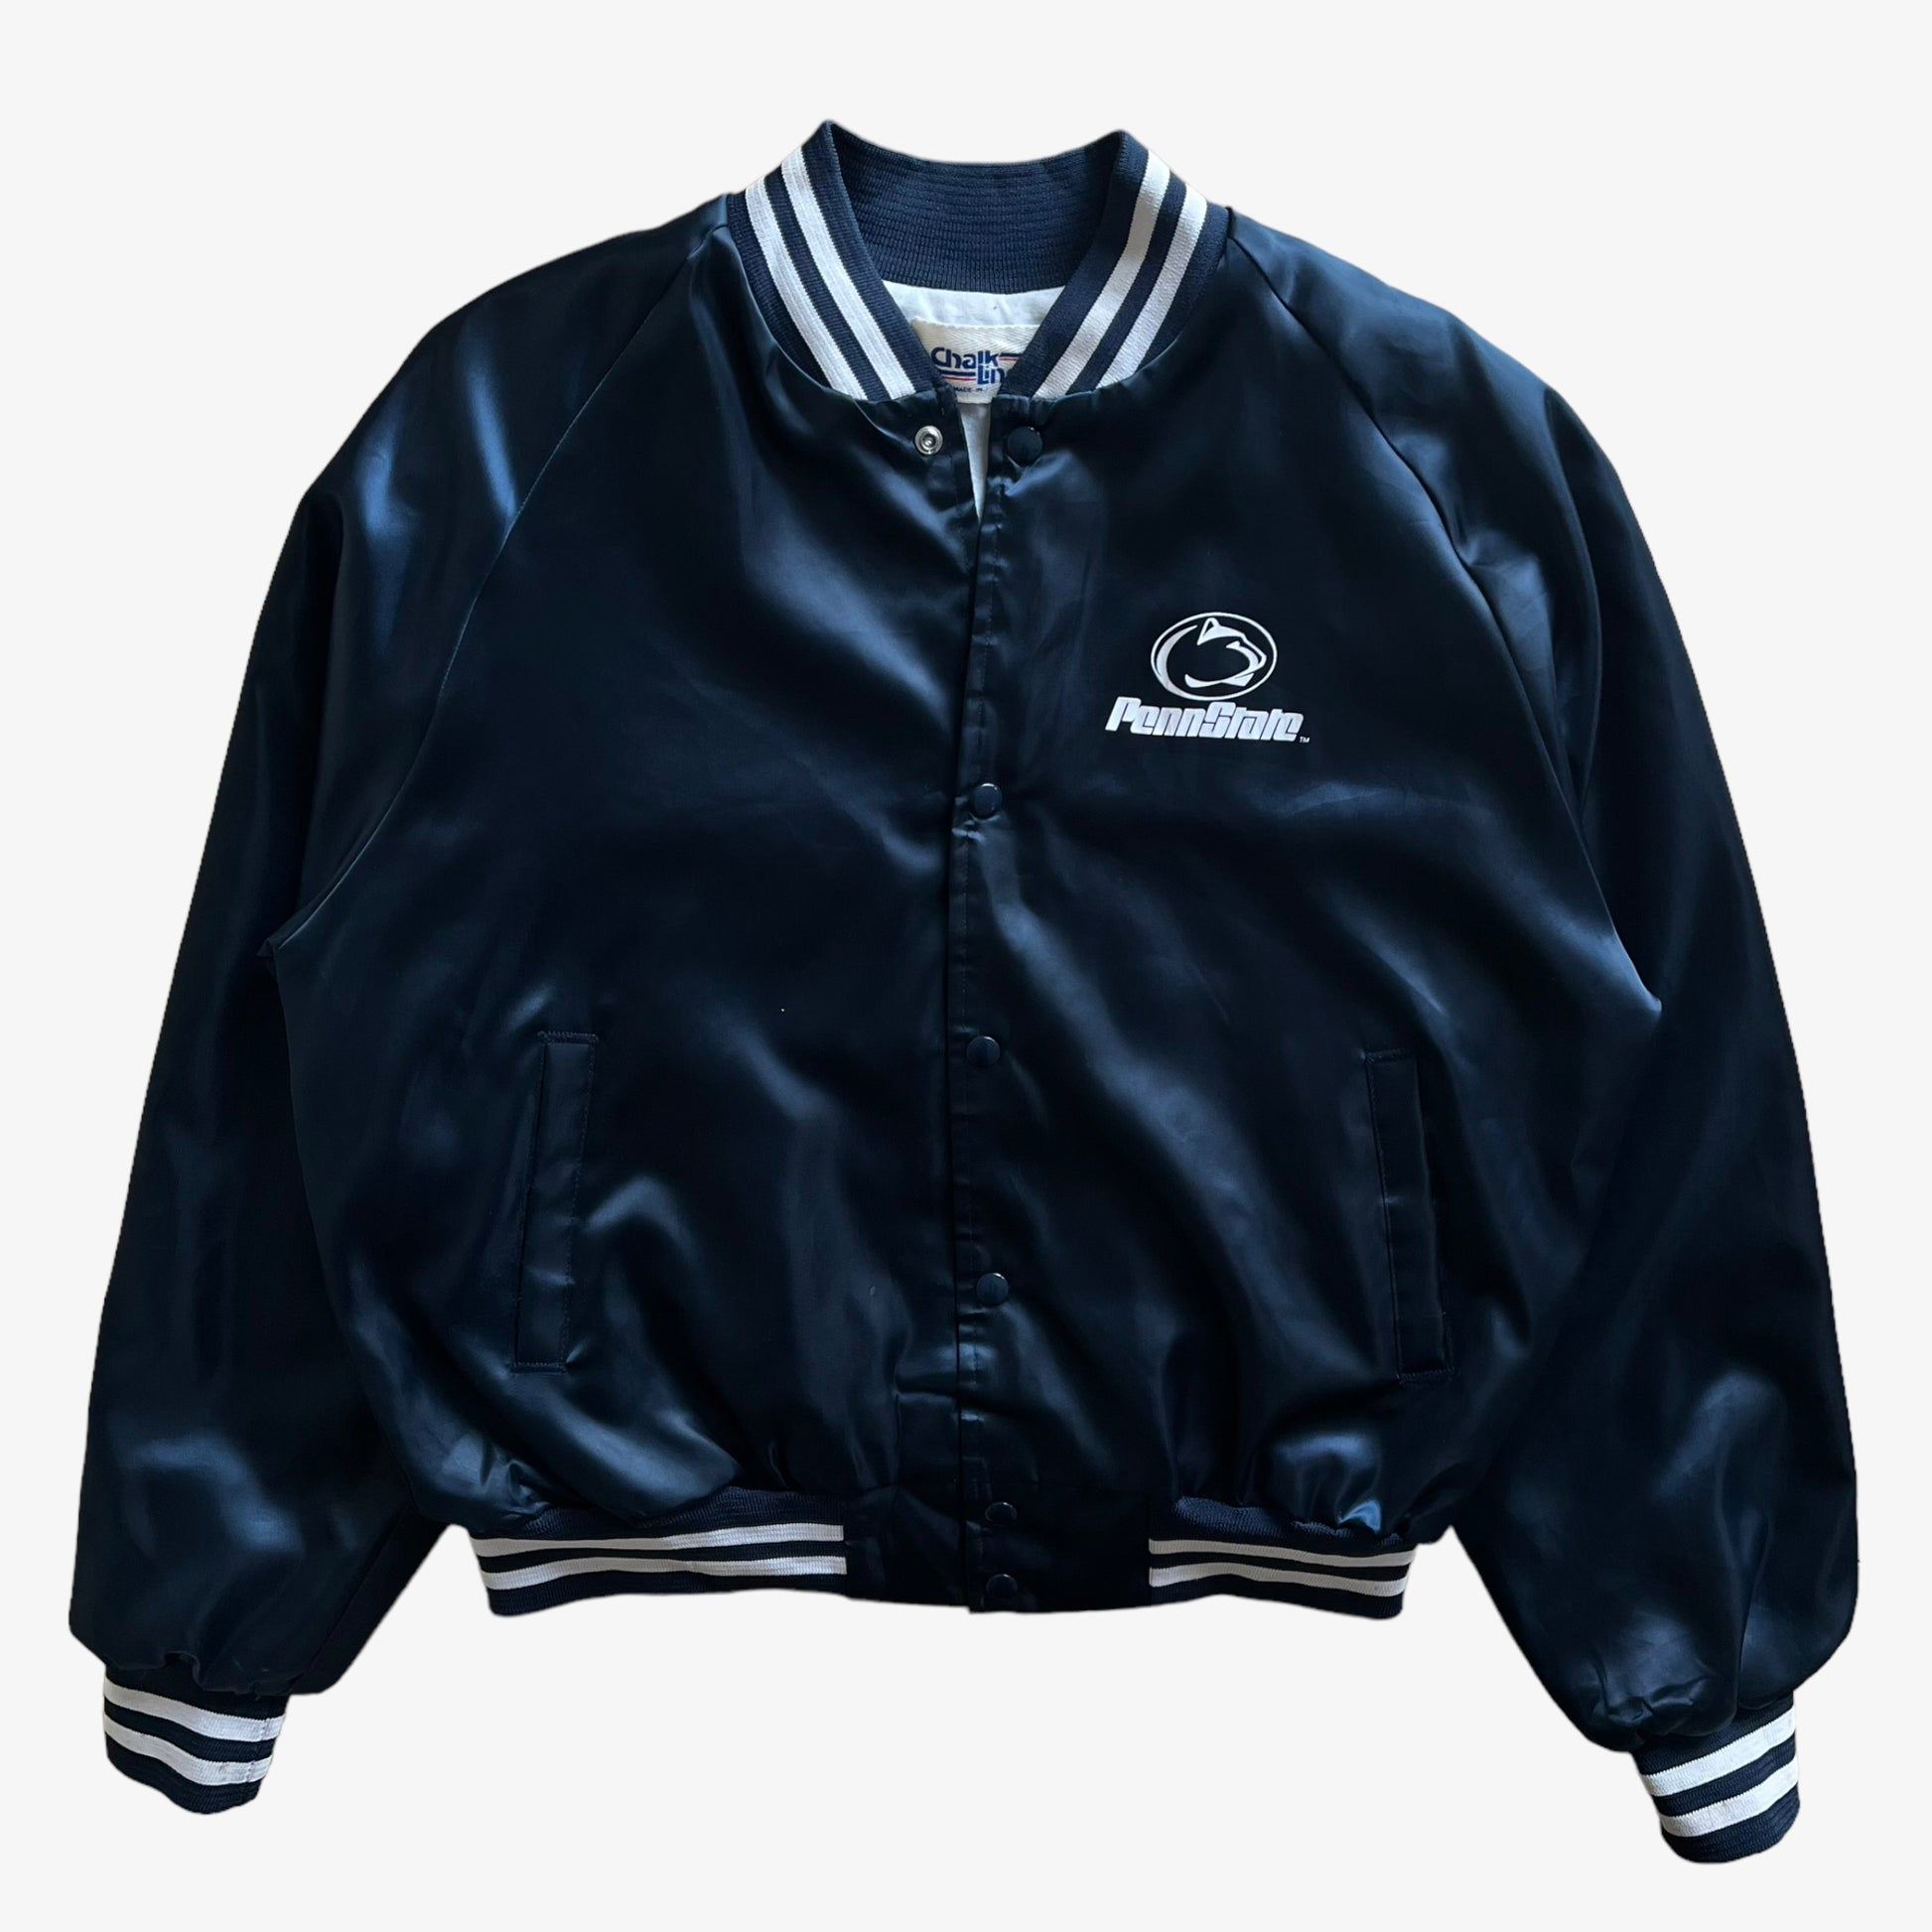 Vintage 80s Mens Chalk Line Penn State Navy Satin Varsity Jacket With Back Spell Out - Casspios Dream